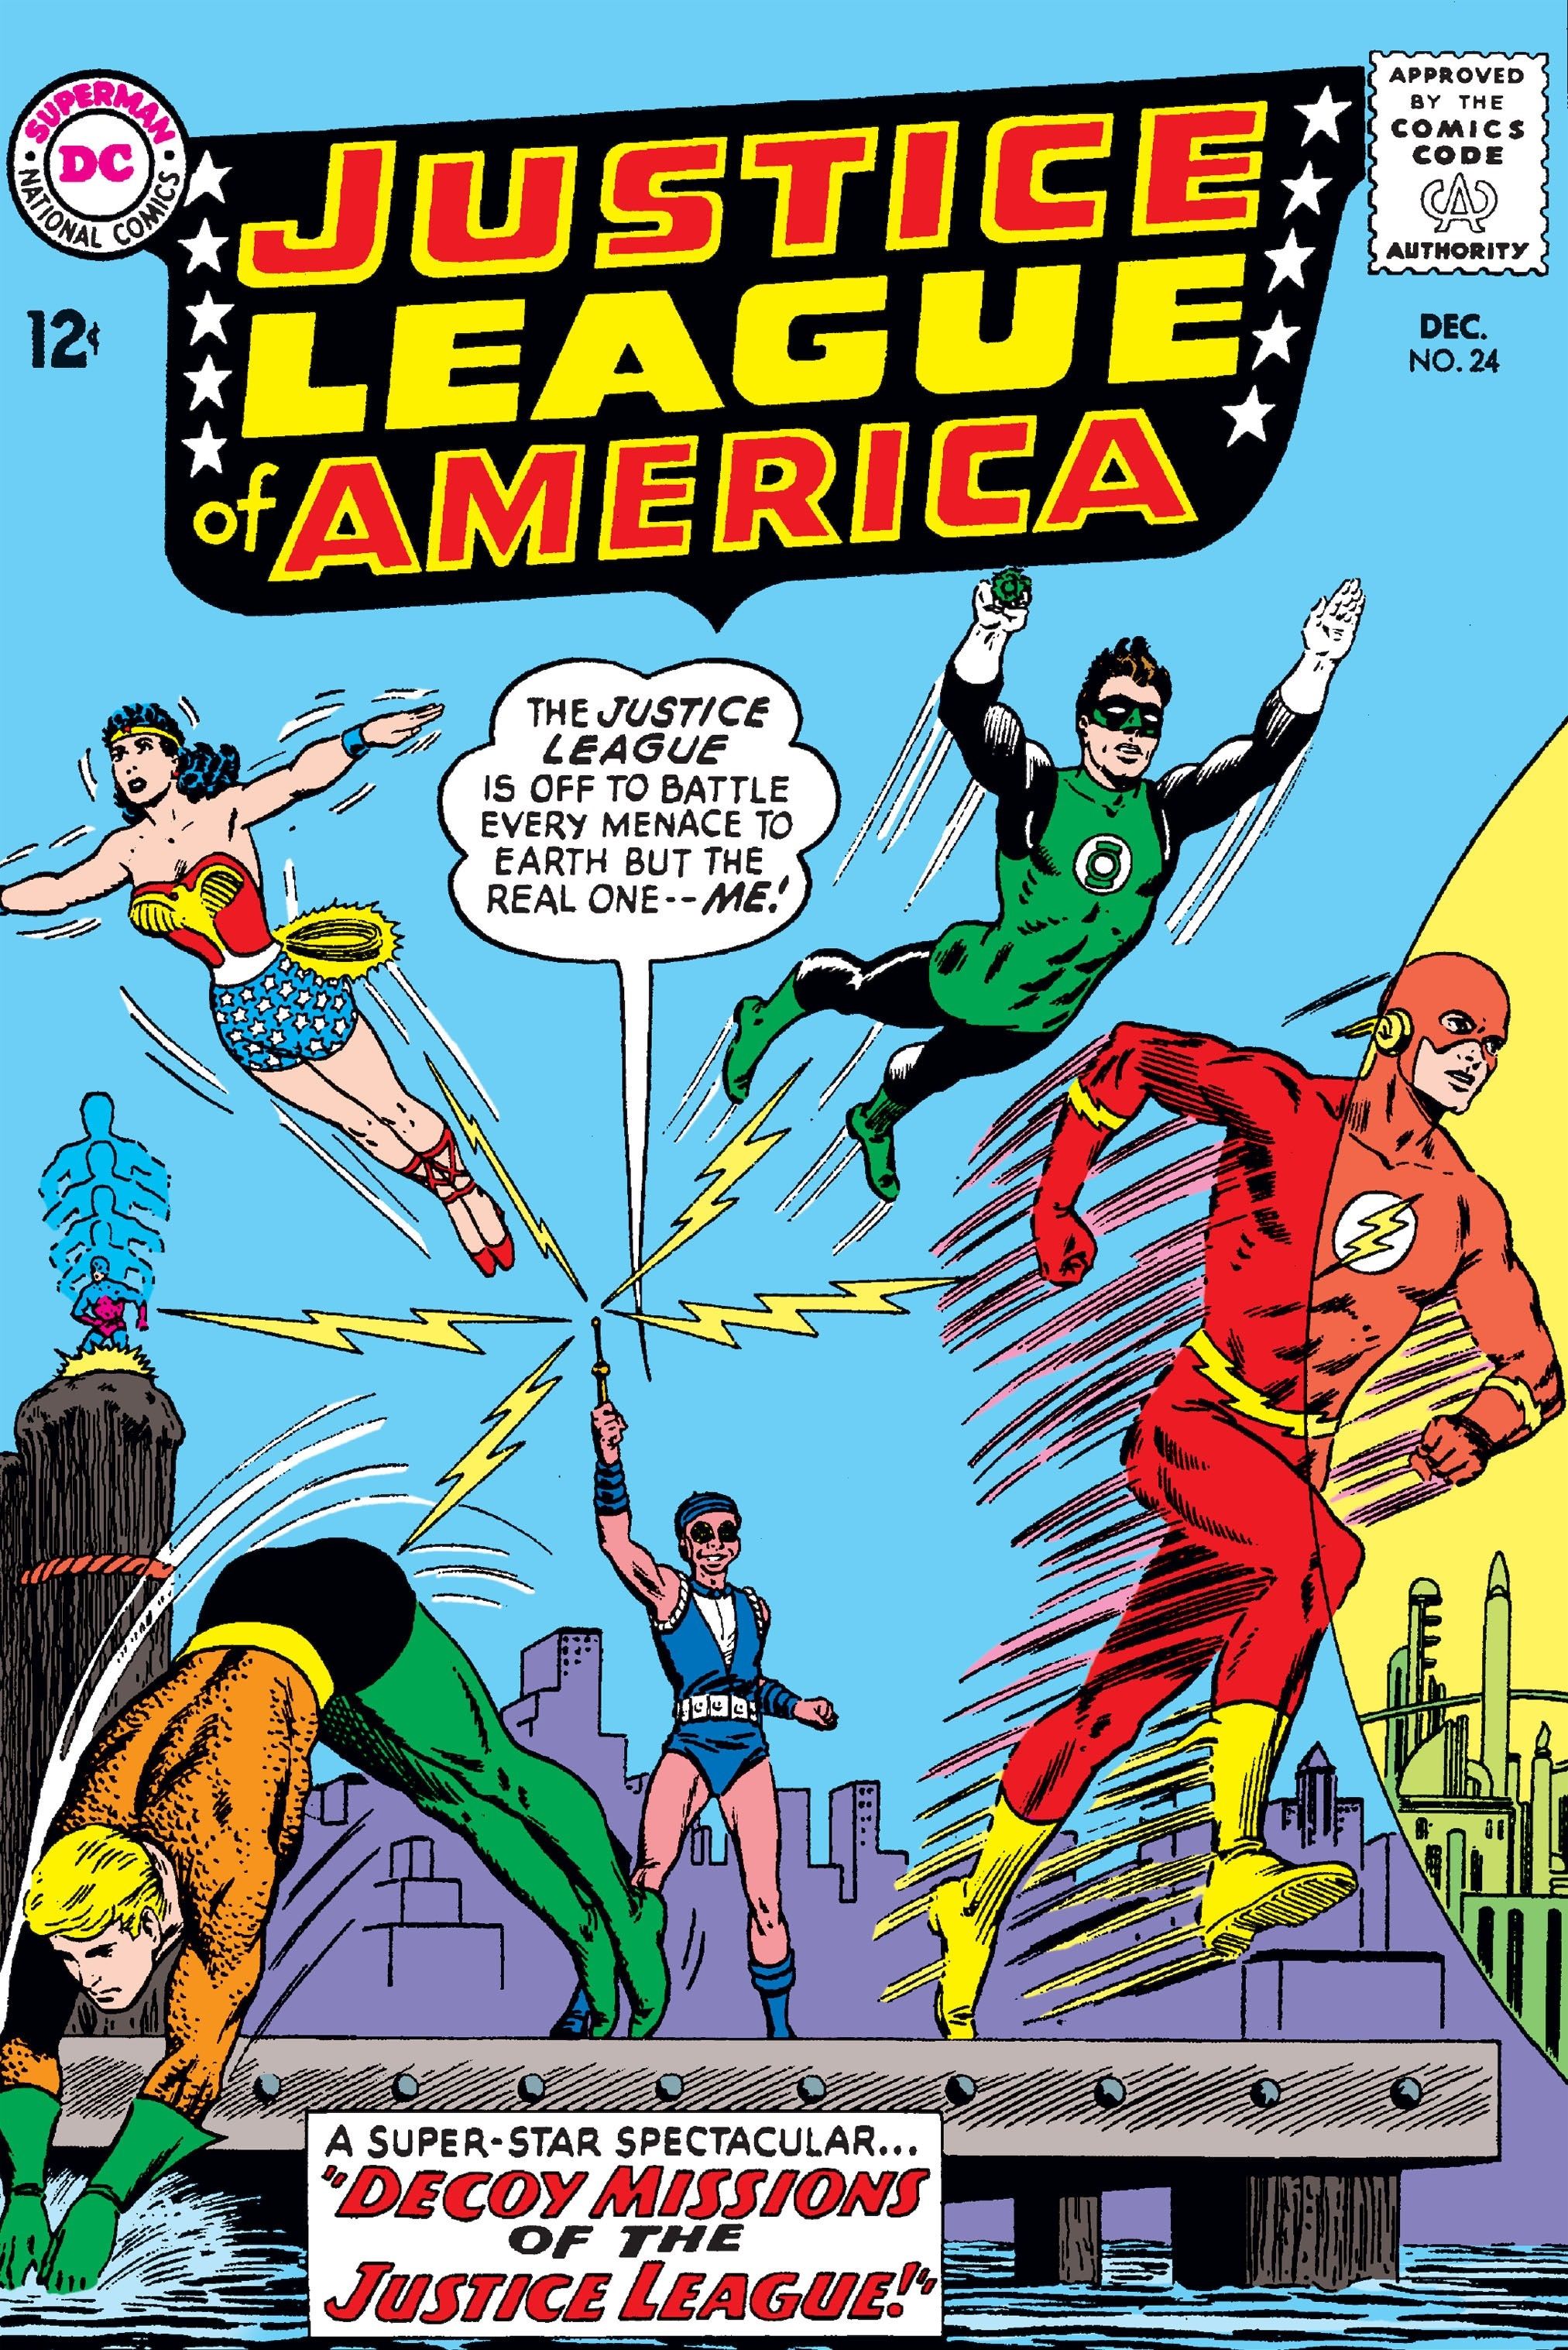 The cover of Justice League of America #24